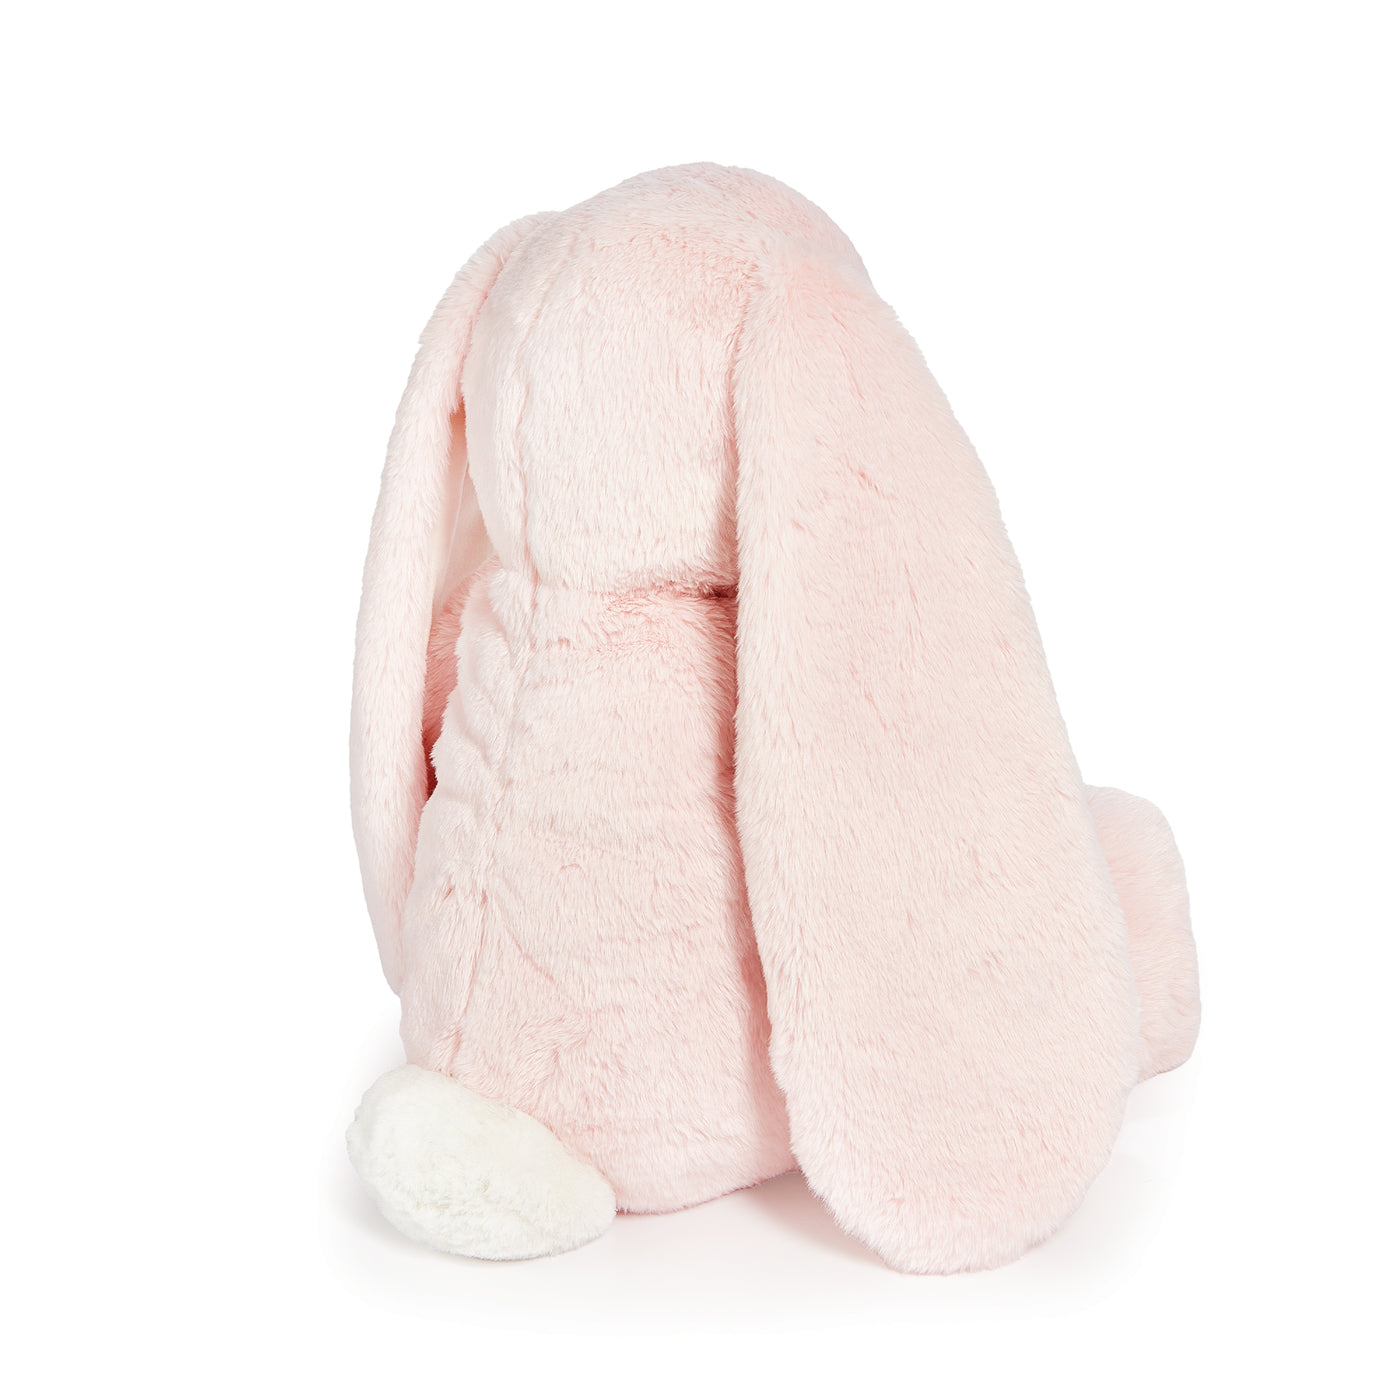 Personalized Big Floppy Bunny - Pink - Give Wink